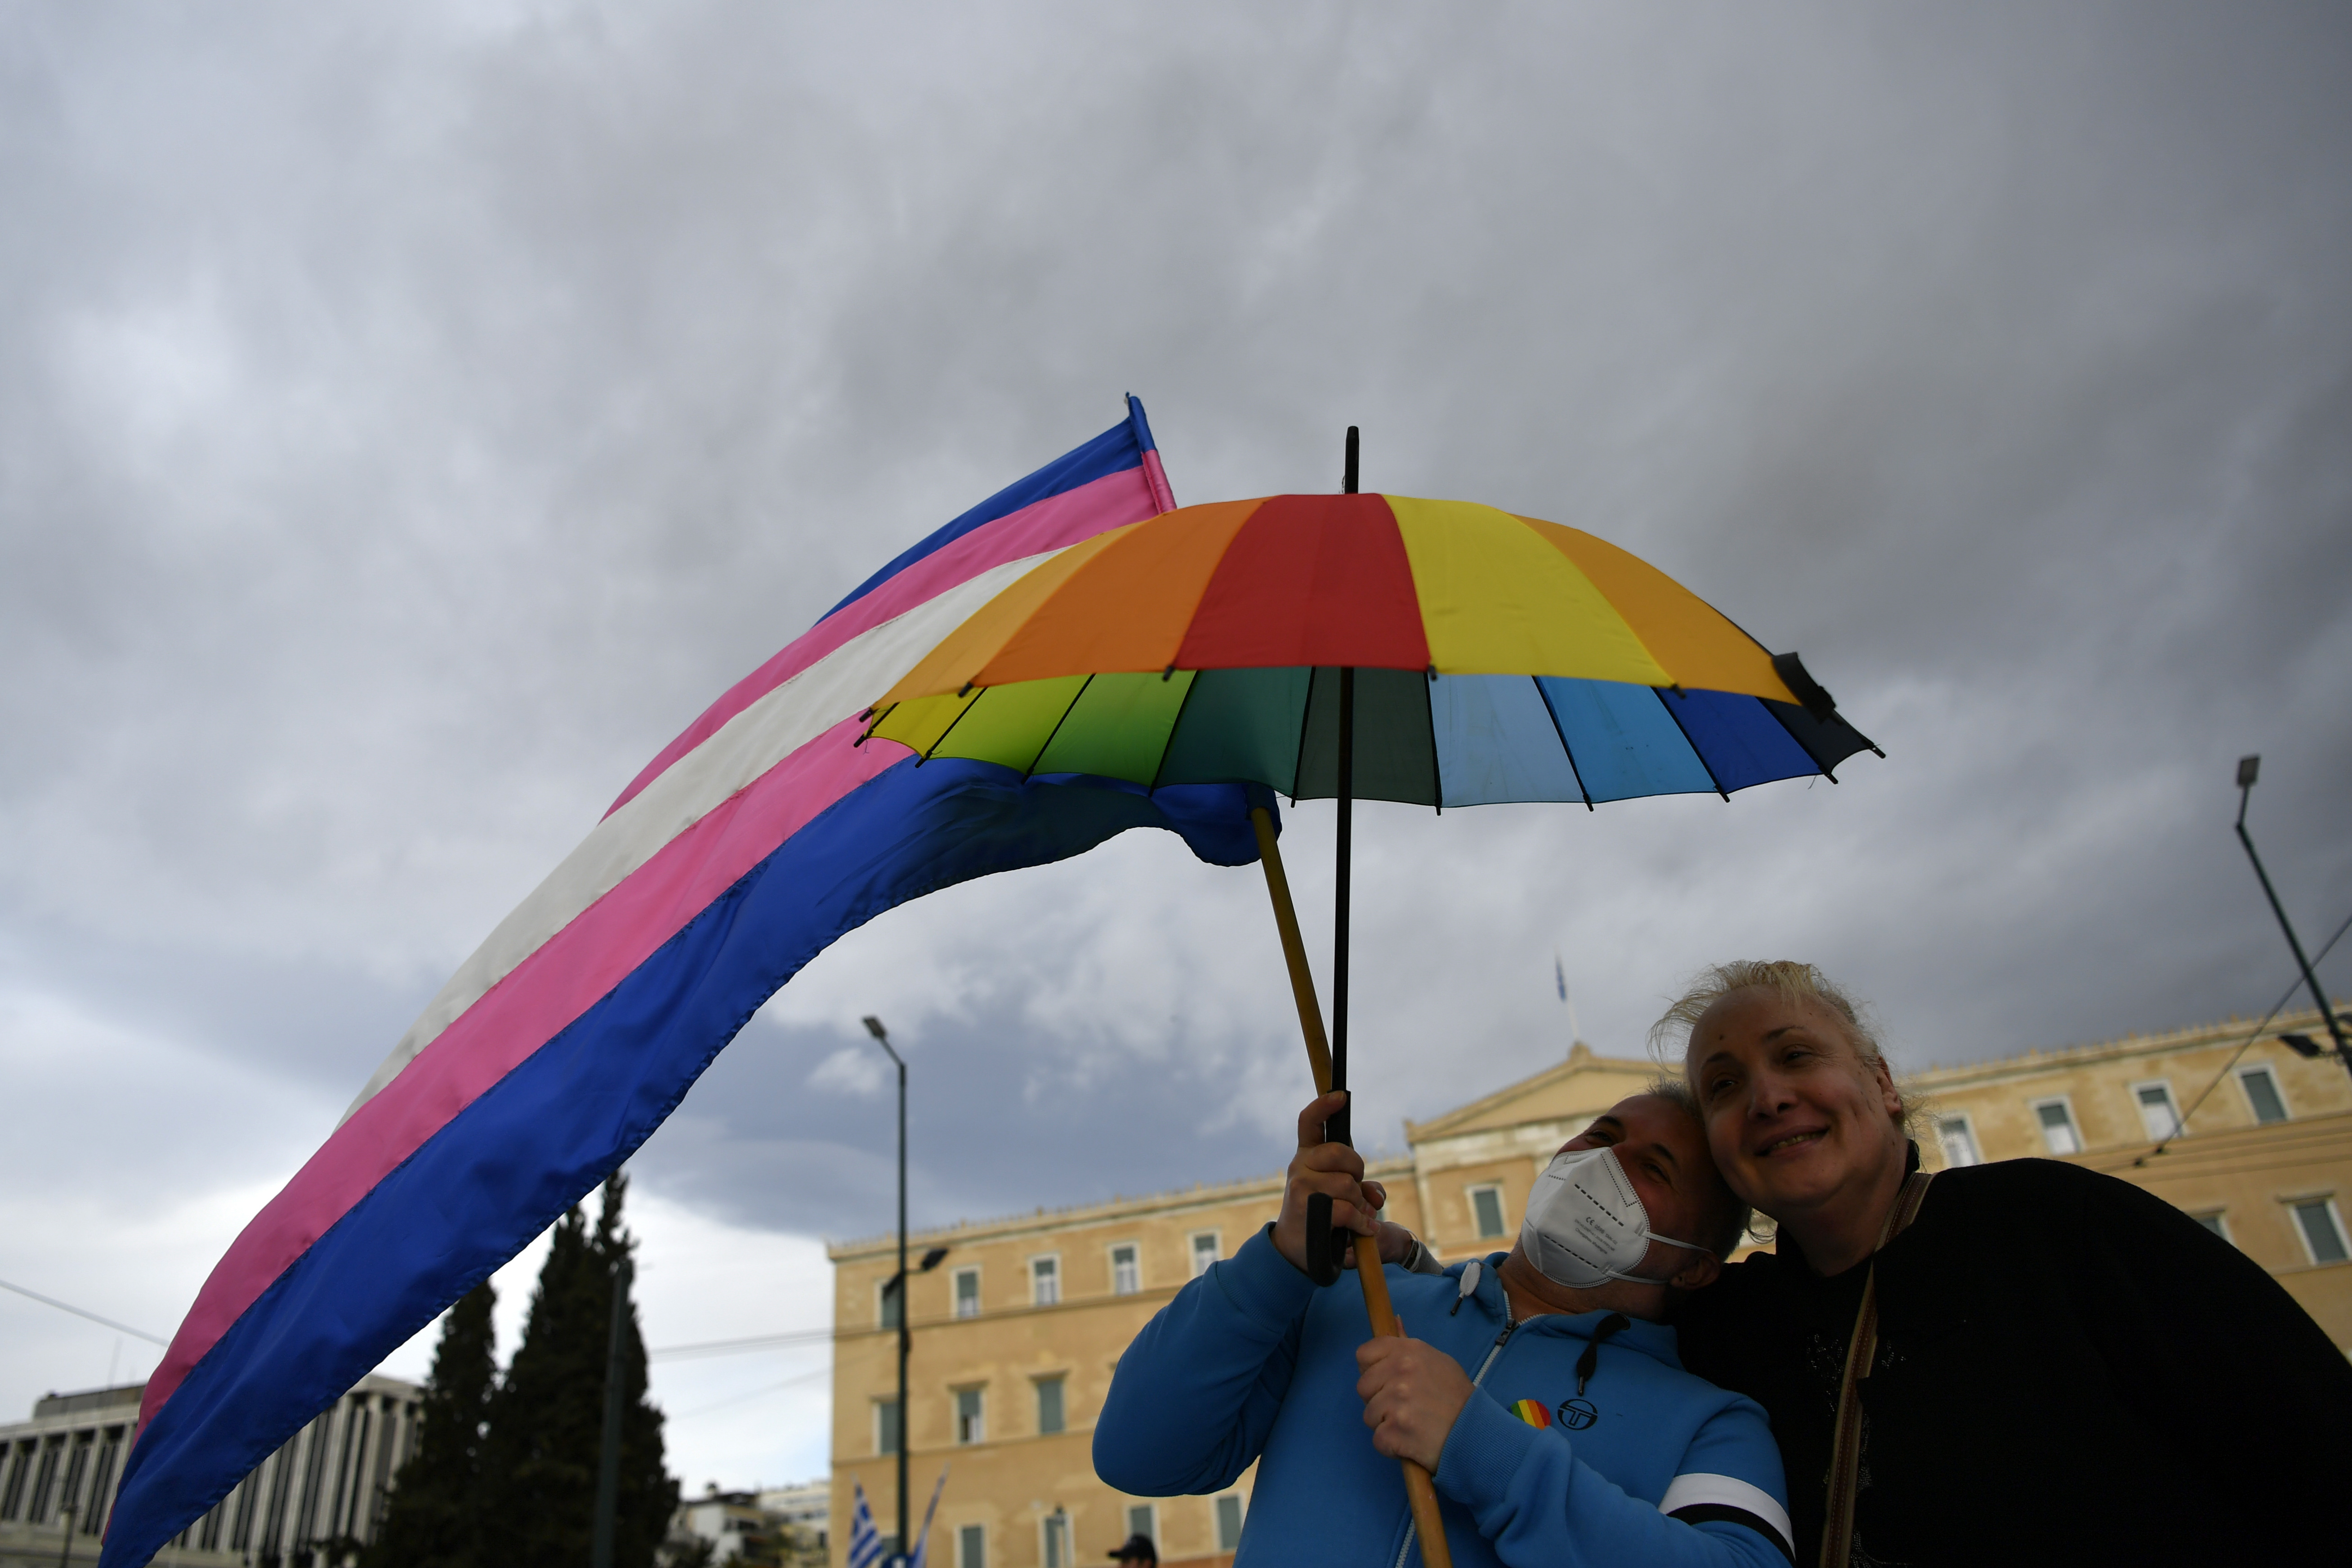 Greece legalizes same-sex marriage, 1st Orthodox Christian country to do so